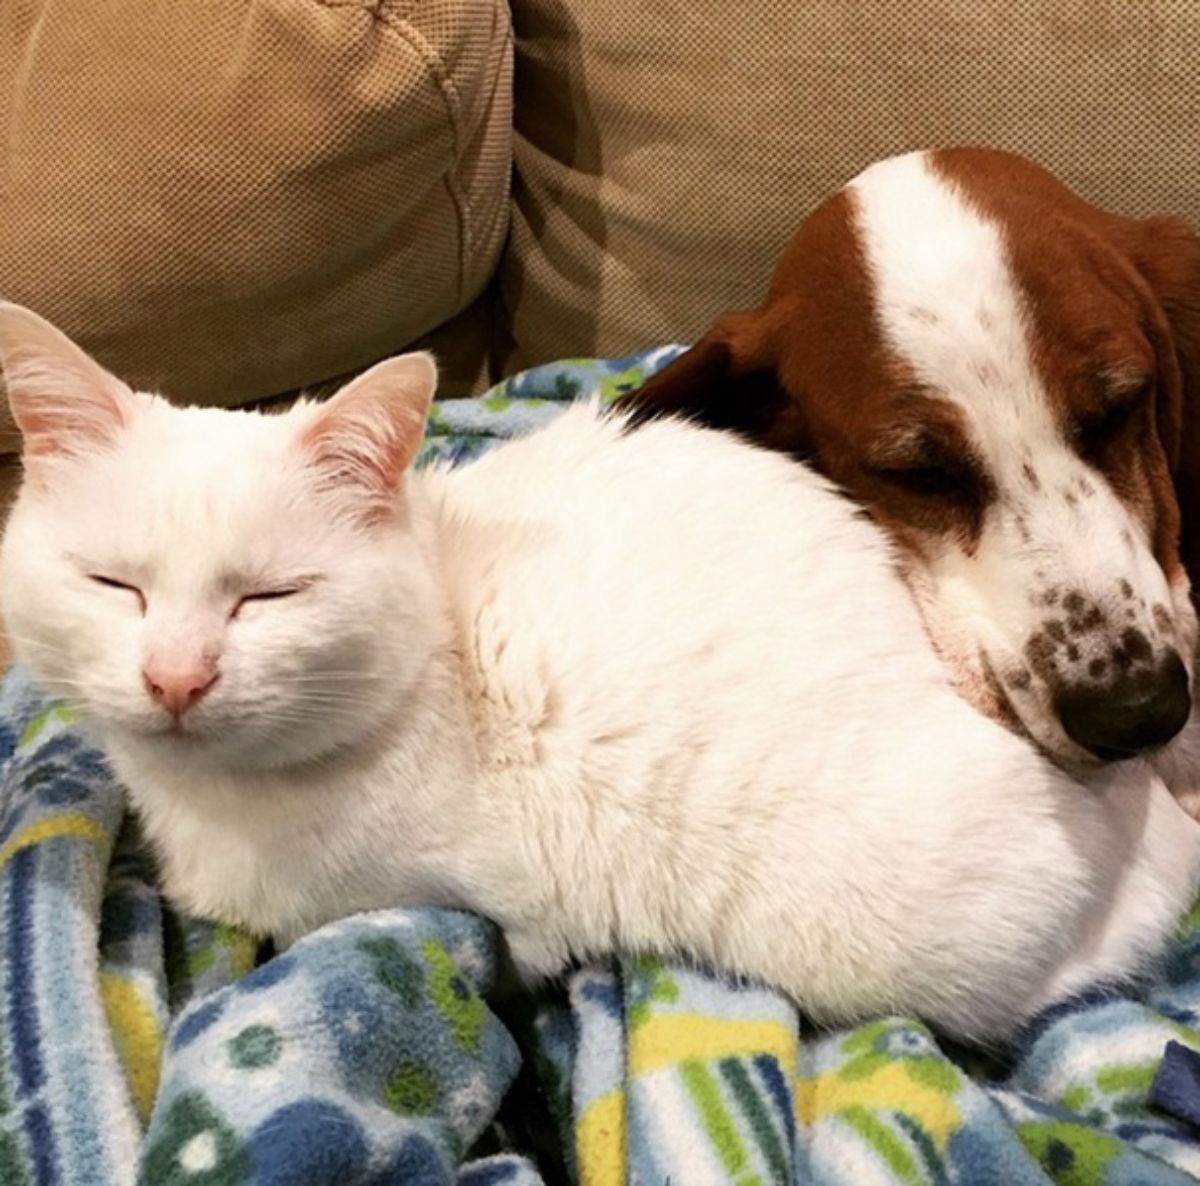 brown and white dog cuddling with a white cat on a colourful blanket